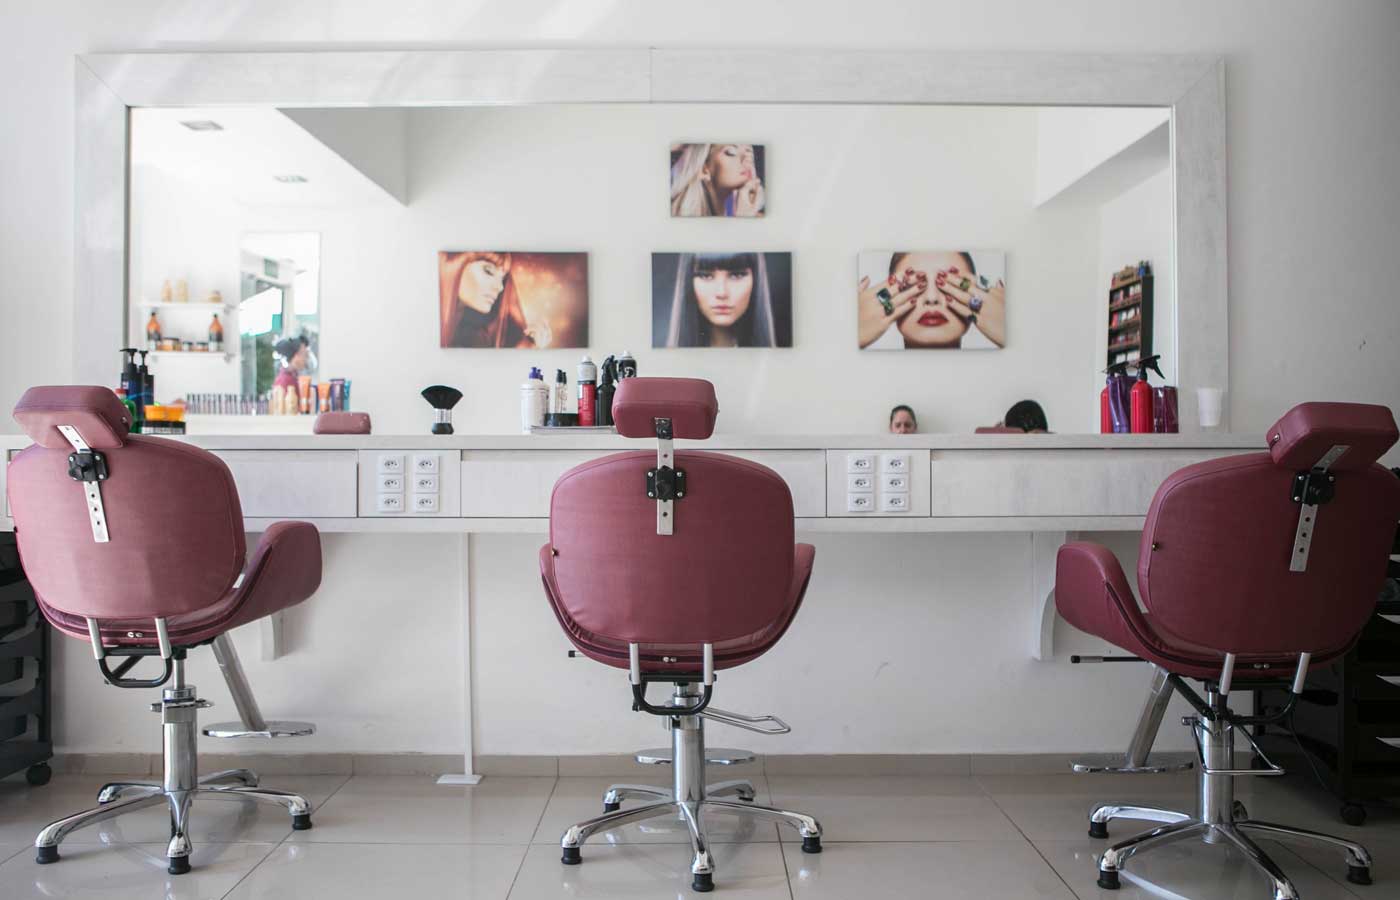 Hairdresser insurance - Shows the inside of a hairdressing salon